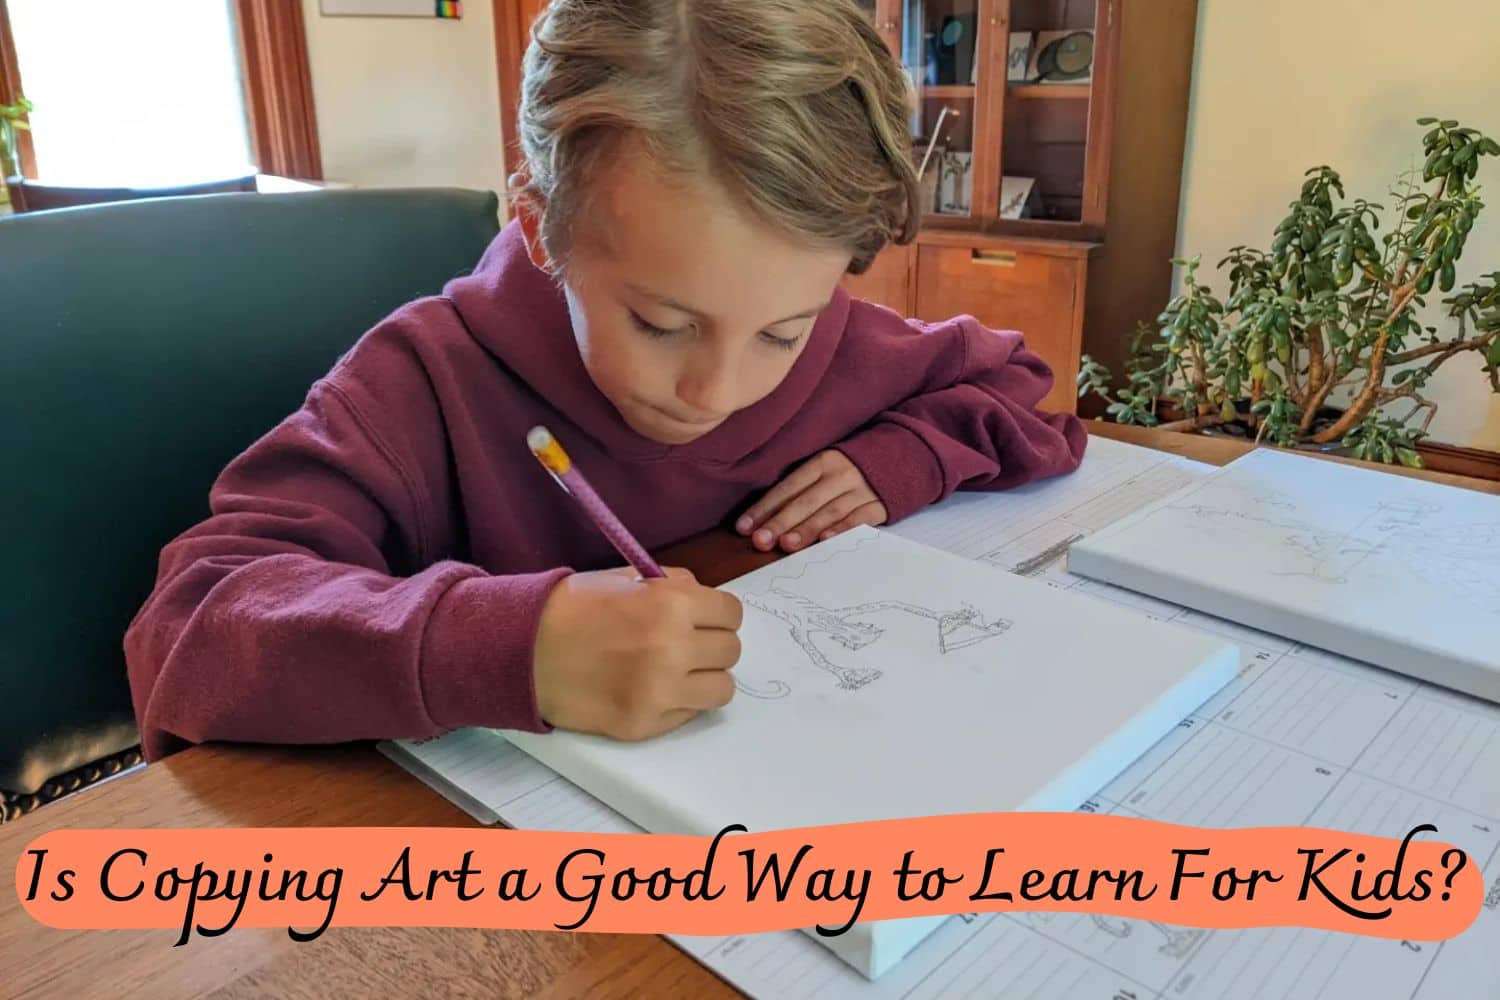 Is Copying Art a Good Way to Learn For Kids